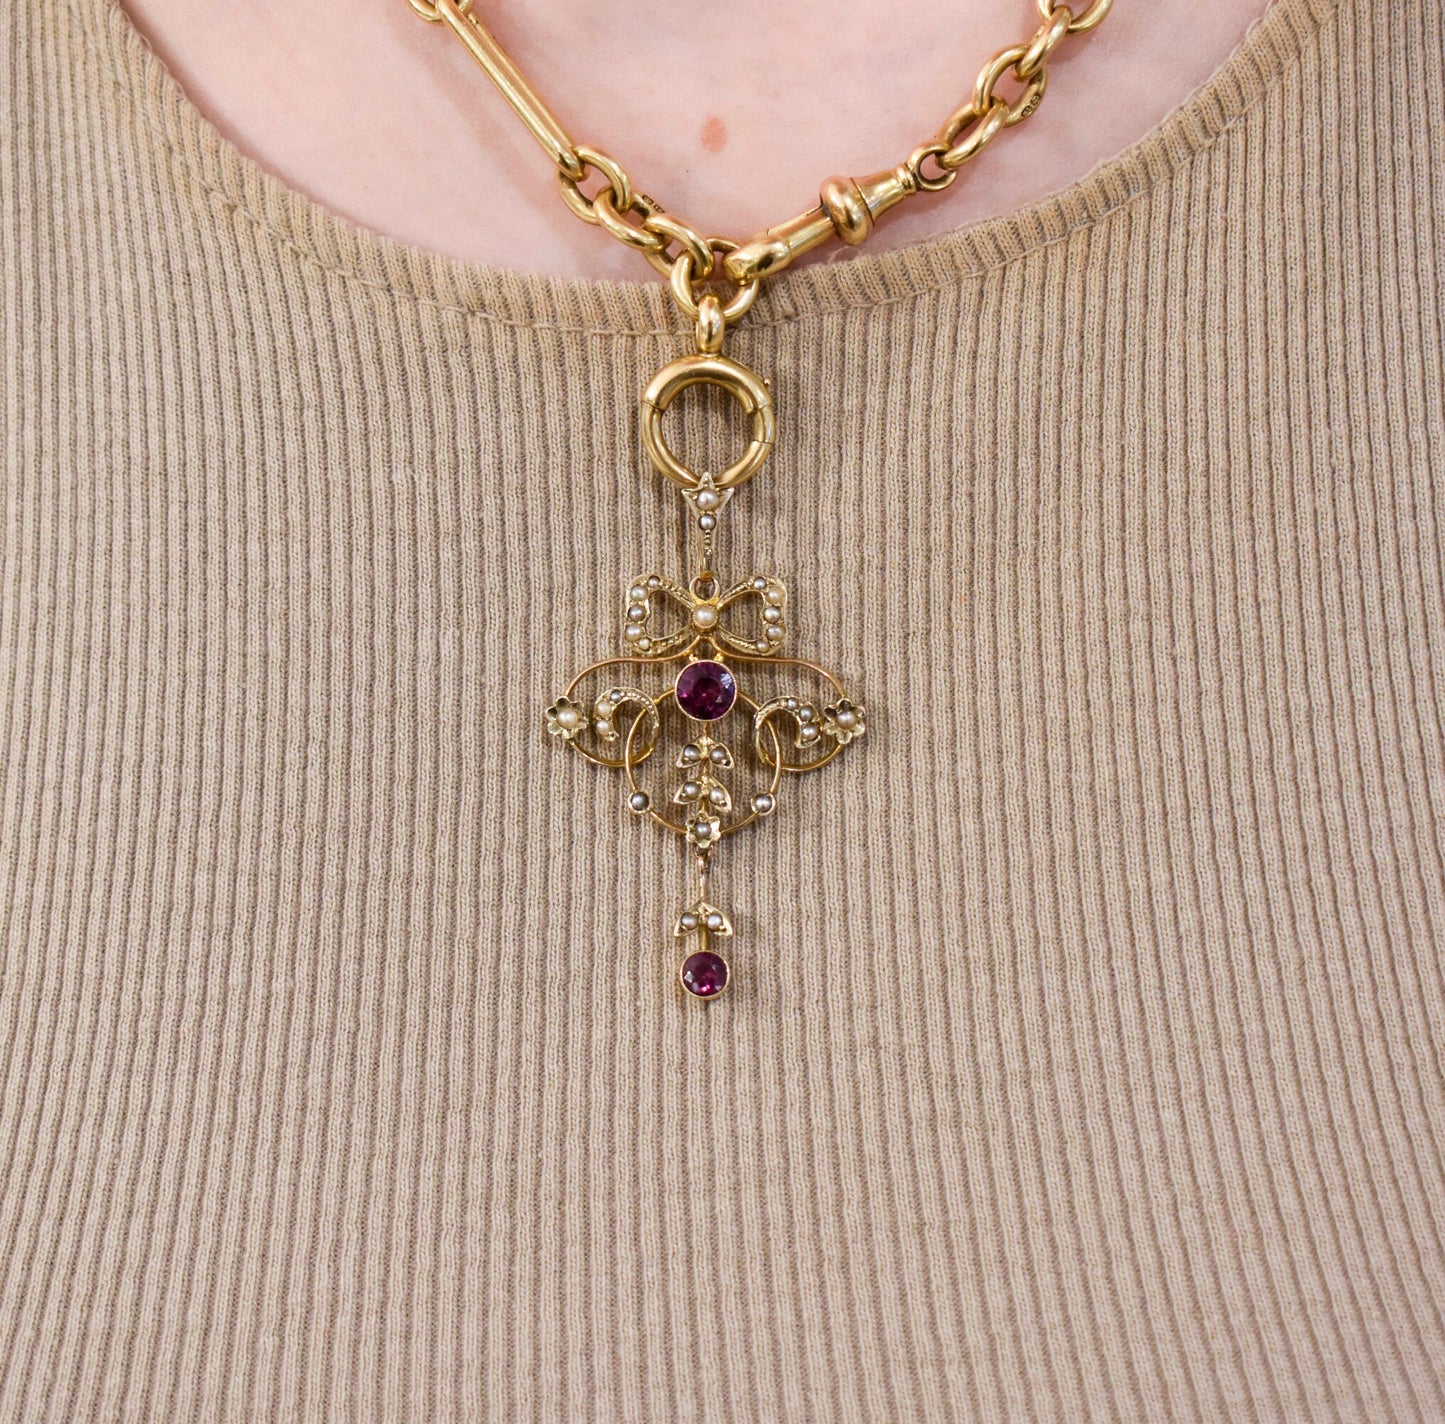 Antique Garnet and Pearl 9ct Yellow Gold Lavalier Pendant | Circa.1900